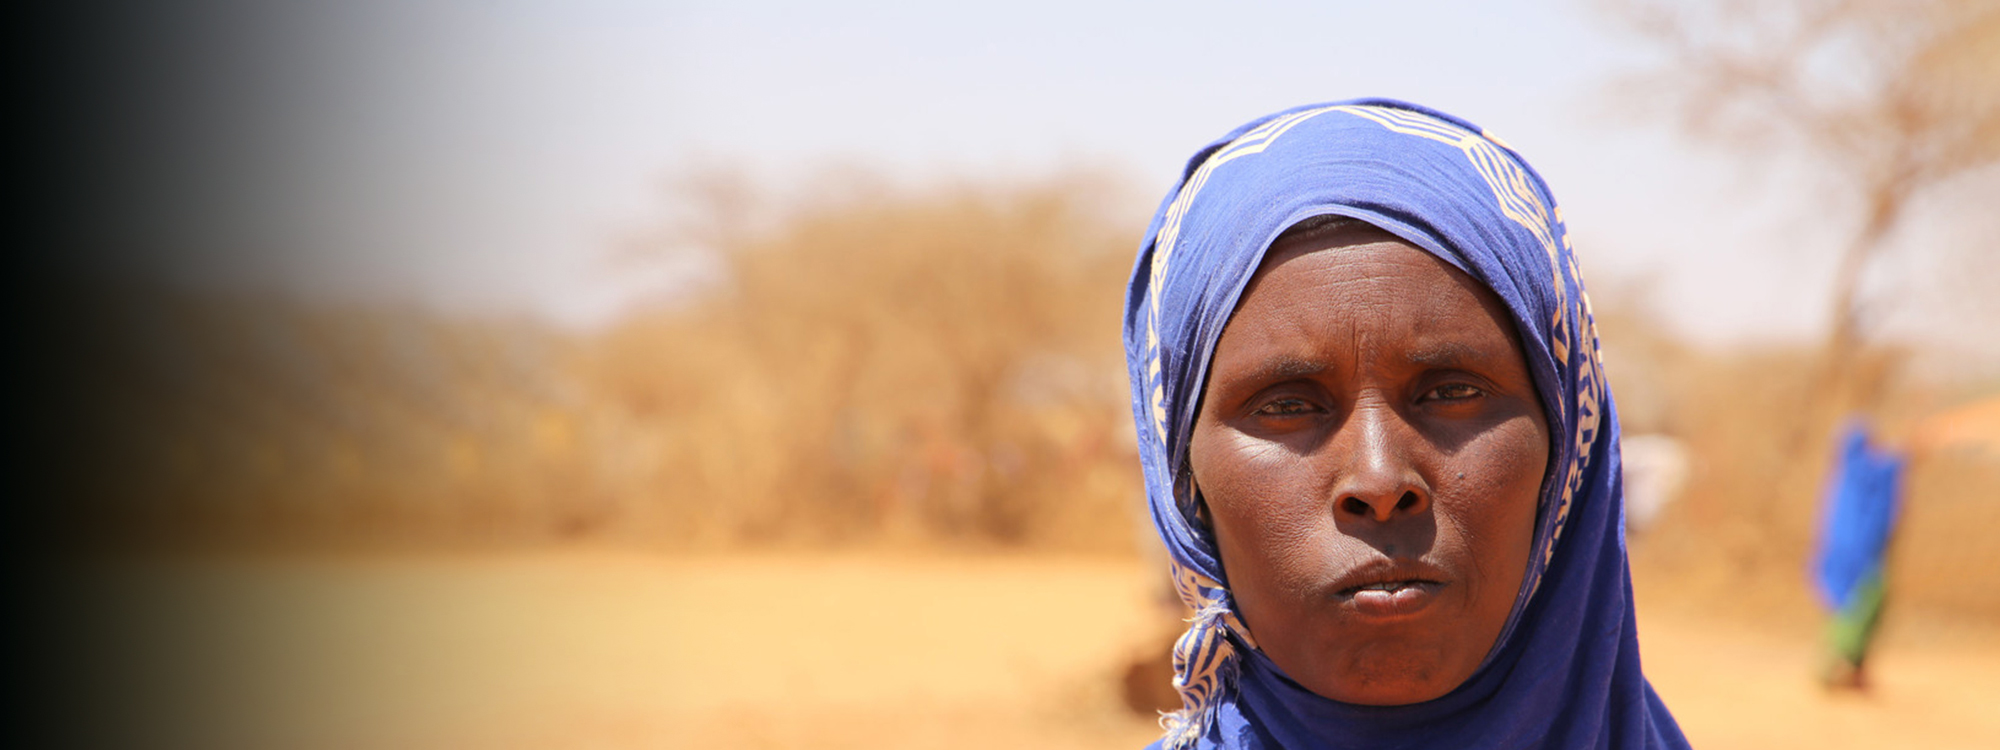 Woman in purple scarf in Somaliland